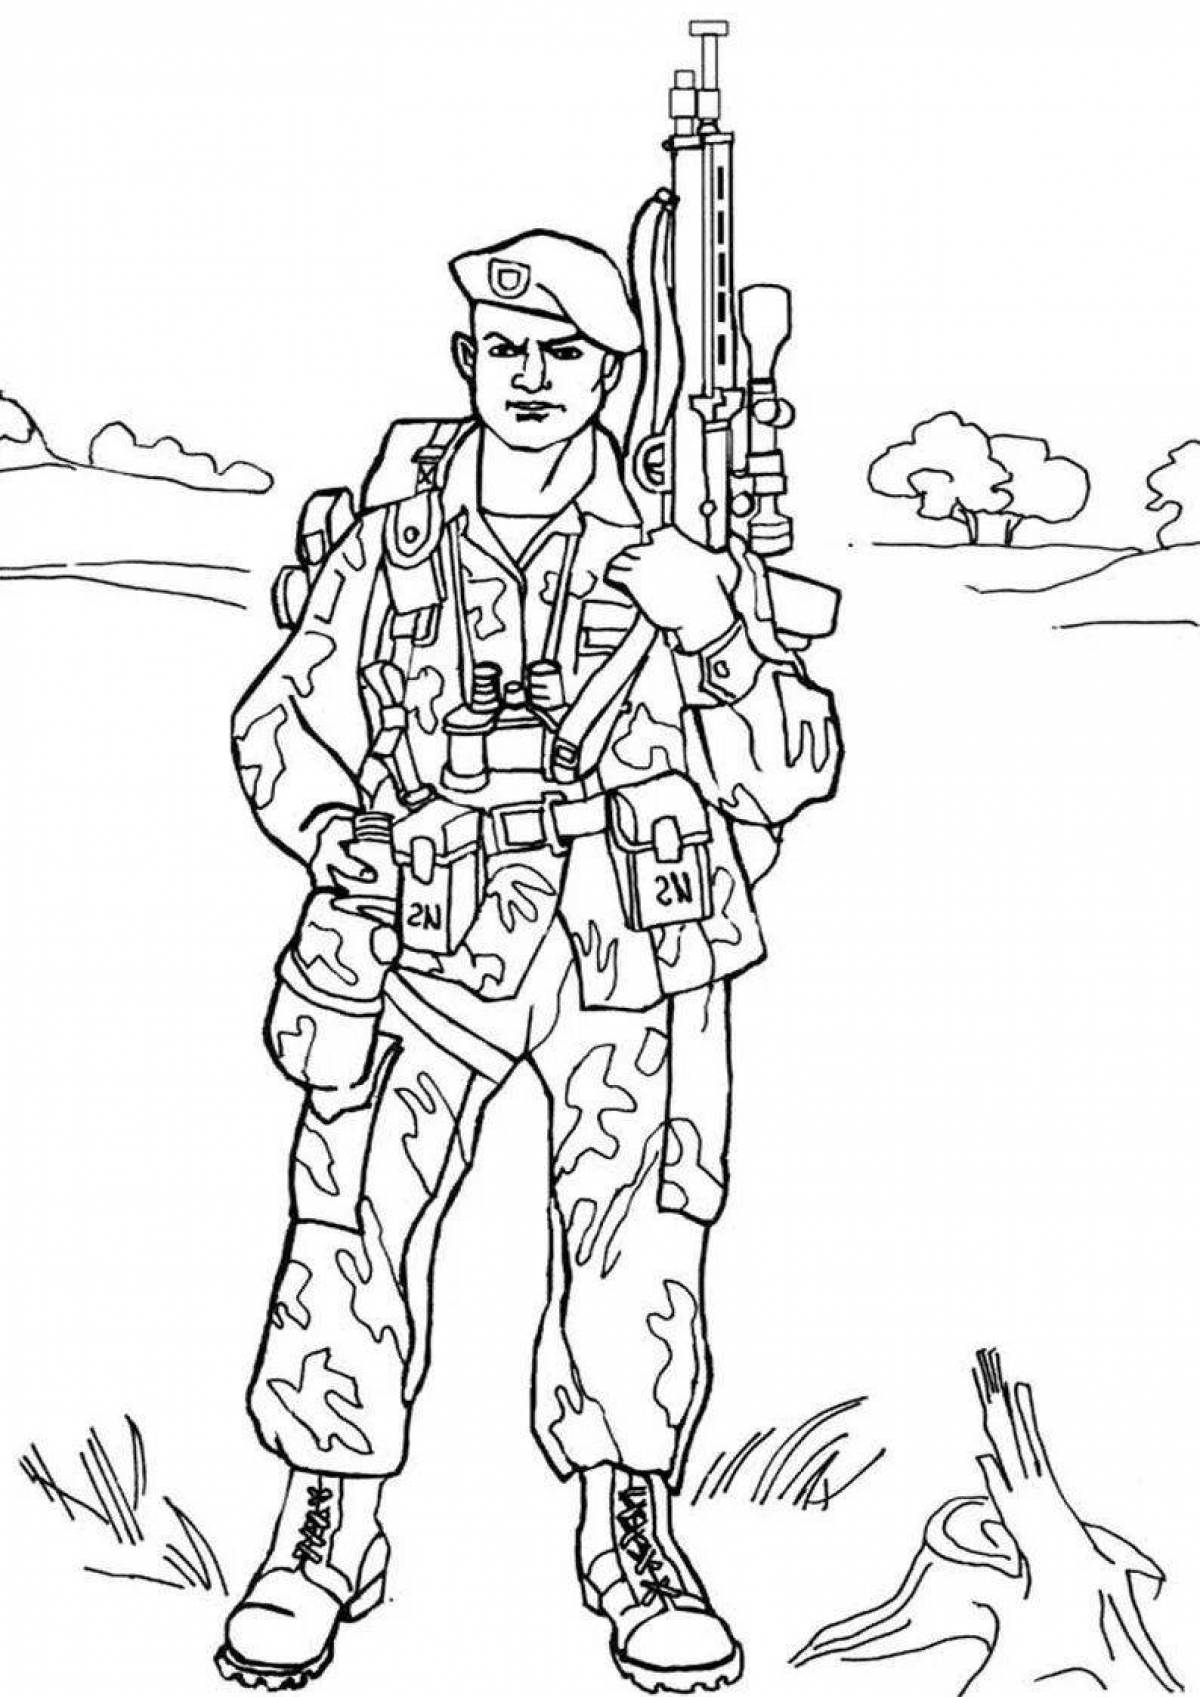 Attractive infantry coloring book for the little ones